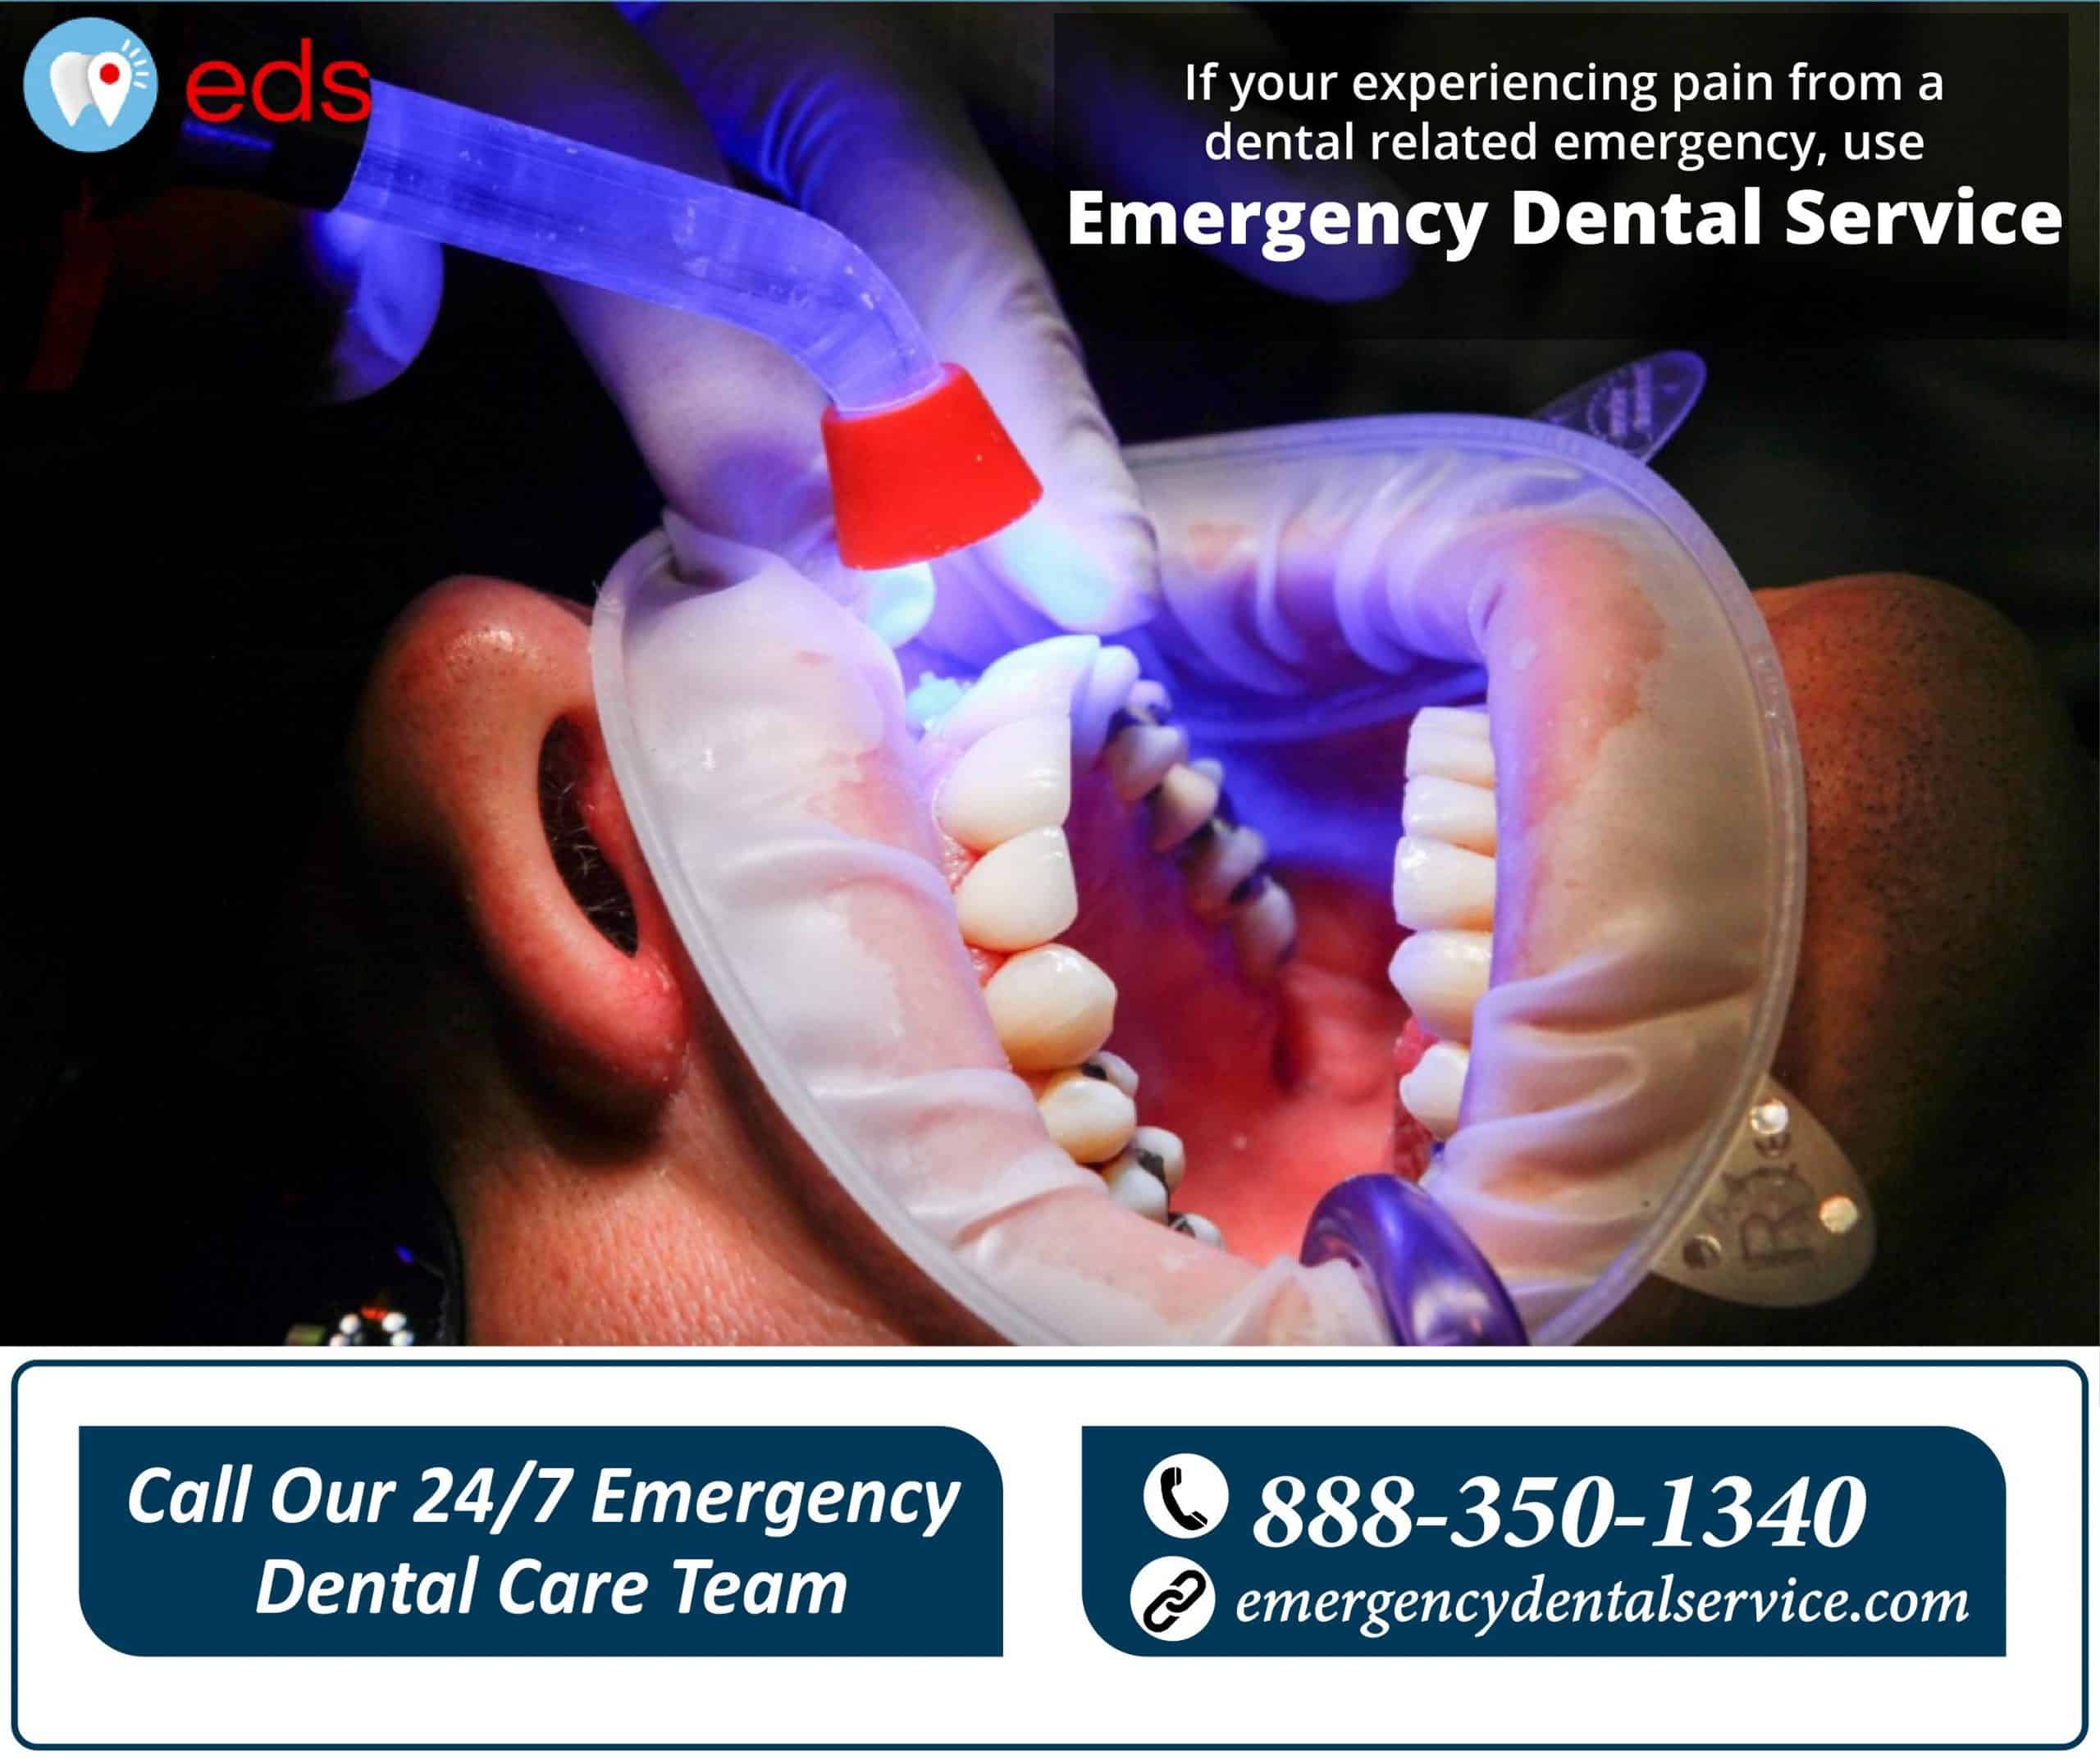 Urgent Dental Care in Any type of Pain